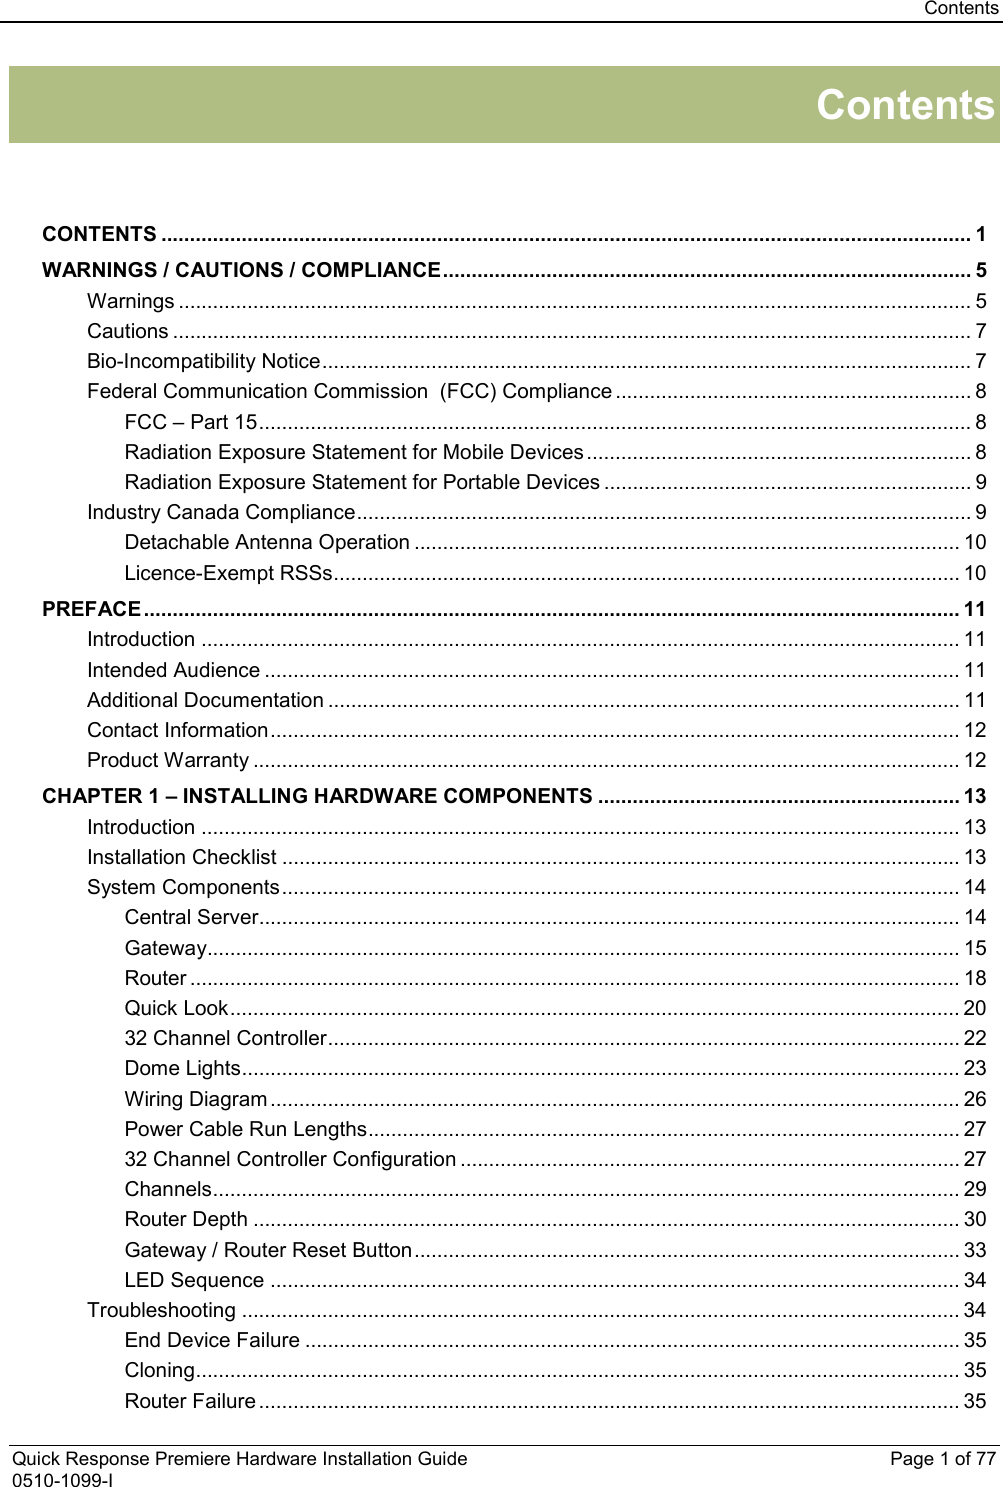 Contents  Quick Response Premiere Hardware Installation Guide    Page 1 of 77 0510-1099-I Contents   CONTENTS ............................................................................................................................................. 1 WARNINGS / CAUTIONS / COMPLIANCE ............................................................................................ 5 Warnings .......................................................................................................................................... 5 Cautions ........................................................................................................................................... 7 Bio-Incompatibility Notice ................................................................................................................. 7 Federal Communication Commission  (FCC) Compliance .............................................................. 8 FCC – Part 15 ............................................................................................................................ 8 Radiation Exposure Statement for Mobile Devices ................................................................... 8 Radiation Exposure Statement for Portable Devices ................................................................ 9 Industry Canada Compliance ........................................................................................................... 9 Detachable Antenna Operation ............................................................................................... 10 Licence-Exempt RSSs ............................................................................................................. 10 PREFACE .............................................................................................................................................. 11 Introduction .................................................................................................................................... 11 Intended Audience ......................................................................................................................... 11 Additional Documentation .............................................................................................................. 11 Contact Information ........................................................................................................................ 12 Product Warranty ........................................................................................................................... 12 CHAPTER 1 – INSTALLING HARDWARE COMPONENTS ............................................................... 13 Introduction .................................................................................................................................... 13 Installation Checklist ...................................................................................................................... 13 System Components ...................................................................................................................... 14 Central Server.......................................................................................................................... 14 Gateway ................................................................................................................................... 15 Router ...................................................................................................................................... 18 Quick Look ............................................................................................................................... 20 32 Channel Controller .............................................................................................................. 22 Dome Lights............................................................................................................................. 23 Wiring Diagram ........................................................................................................................ 26 Power Cable Run Lengths ....................................................................................................... 27 32 Channel Controller Configuration ....................................................................................... 27 Channels .................................................................................................................................. 29 Router Depth ........................................................................................................................... 30 Gateway / Router Reset Button ............................................................................................... 33 LED Sequence ........................................................................................................................ 34 Troubleshooting ............................................................................................................................. 34 End Device Failure .................................................................................................................. 35 Cloning ..................................................................................................................................... 35 Router Failure .......................................................................................................................... 35 